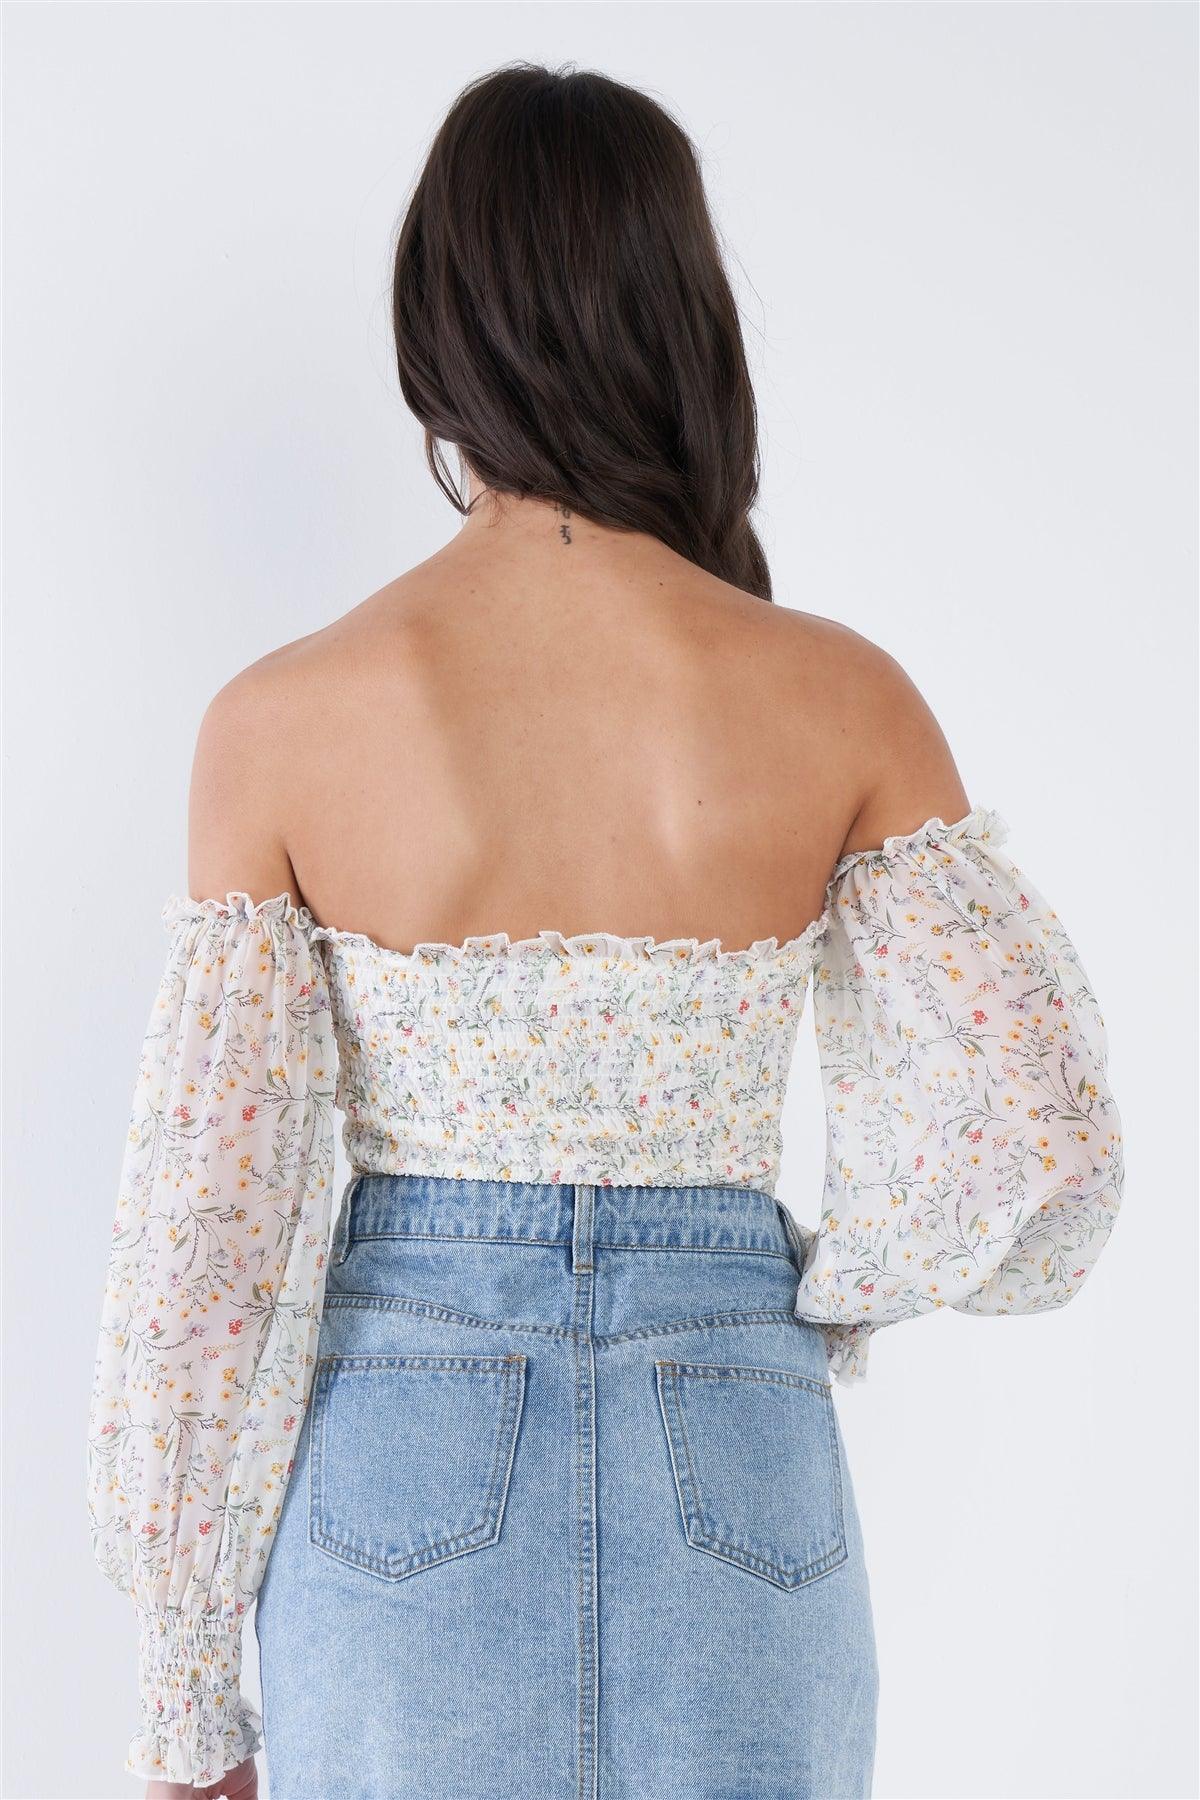 Off-White Sheer Floral Off-The-Shoulder Peplum Top  /3-2-1